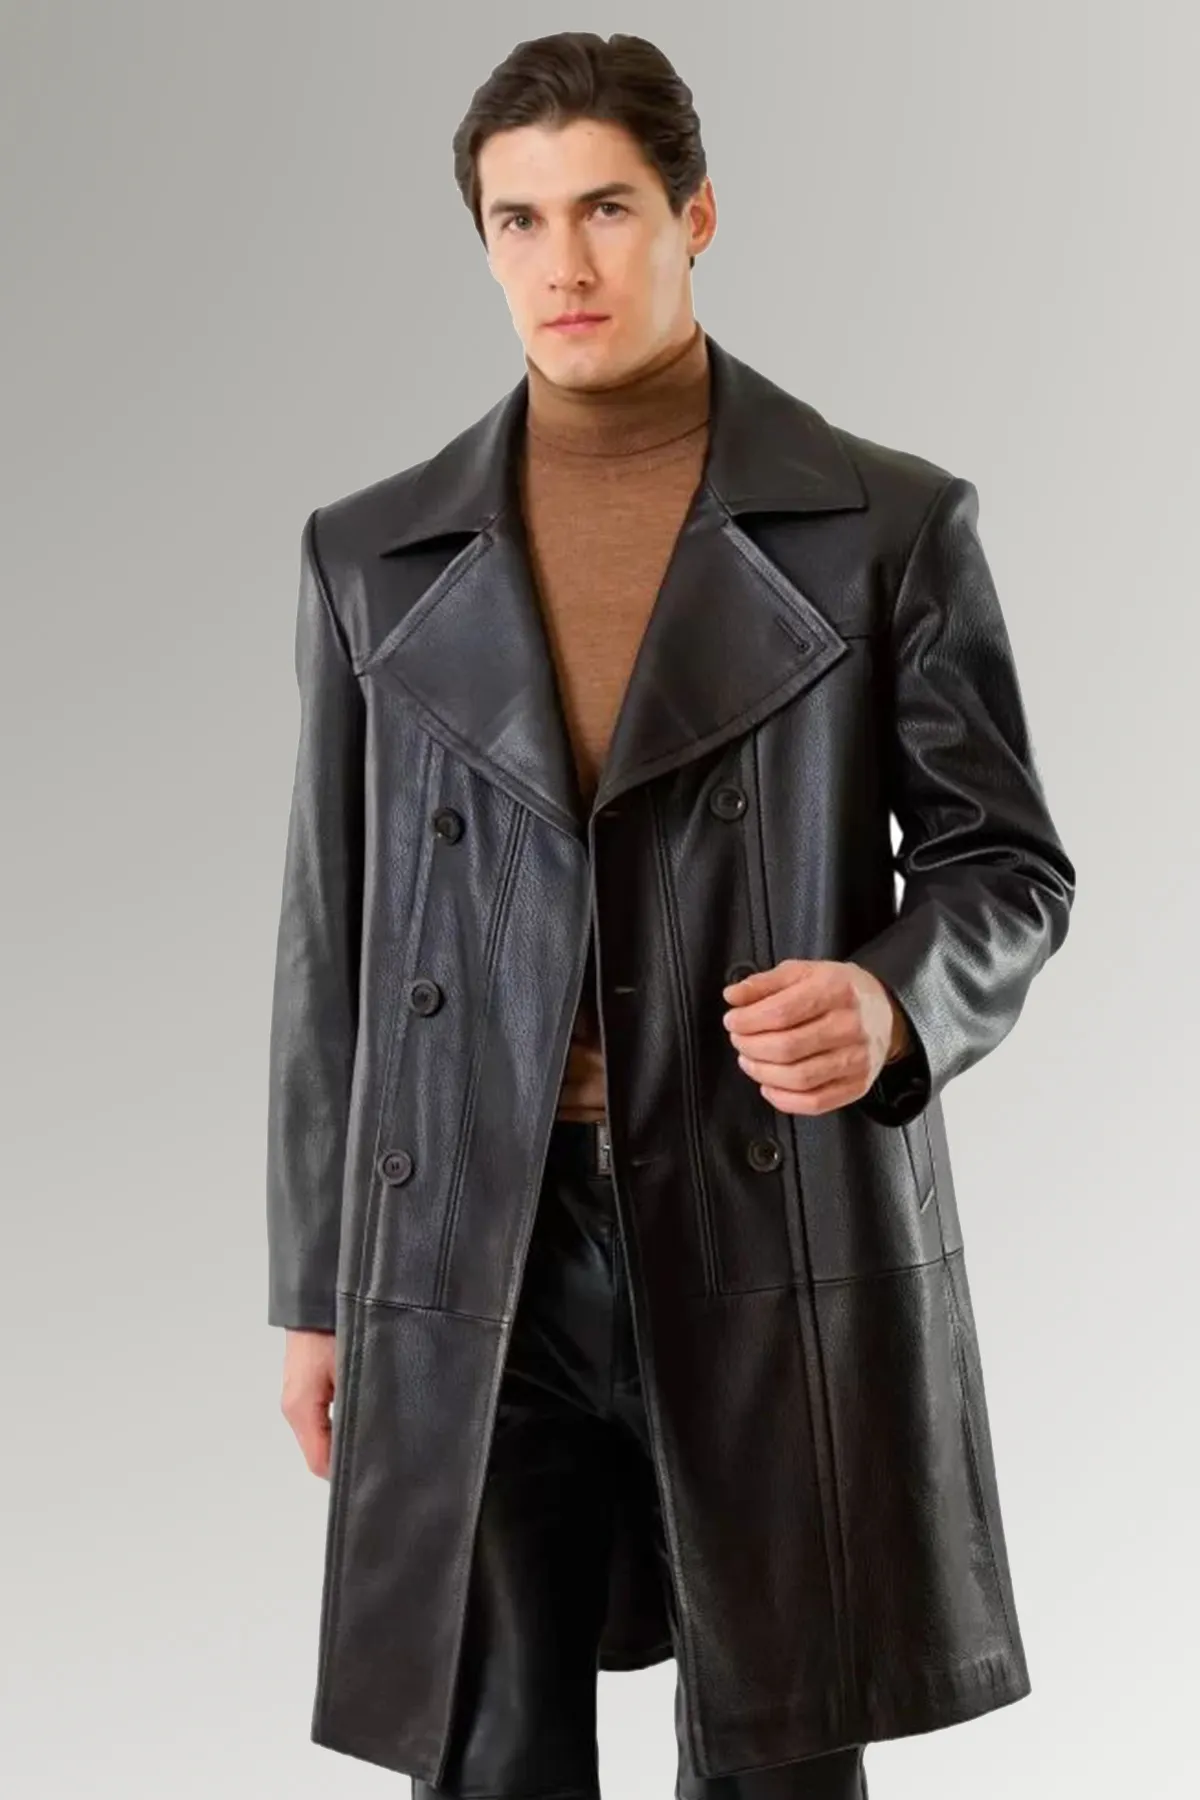 Men's Black Buttoned Classical Leather Trench Coat | MARDAMS